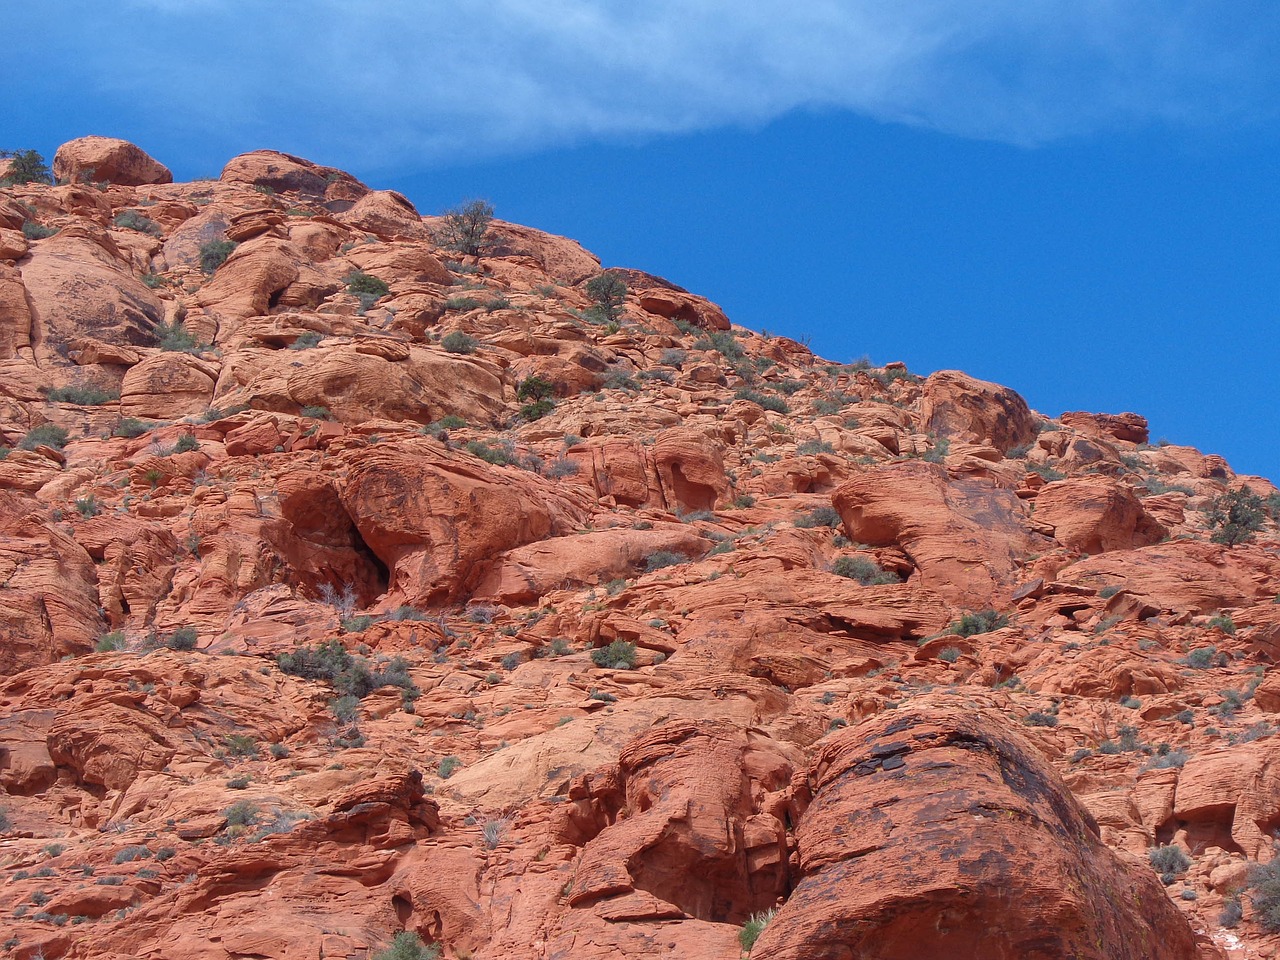 Do not pass up the opportunity to hike around Calico Basin as it's definitely one of the more fun Free Things To Do In Las Vegas With Kids.